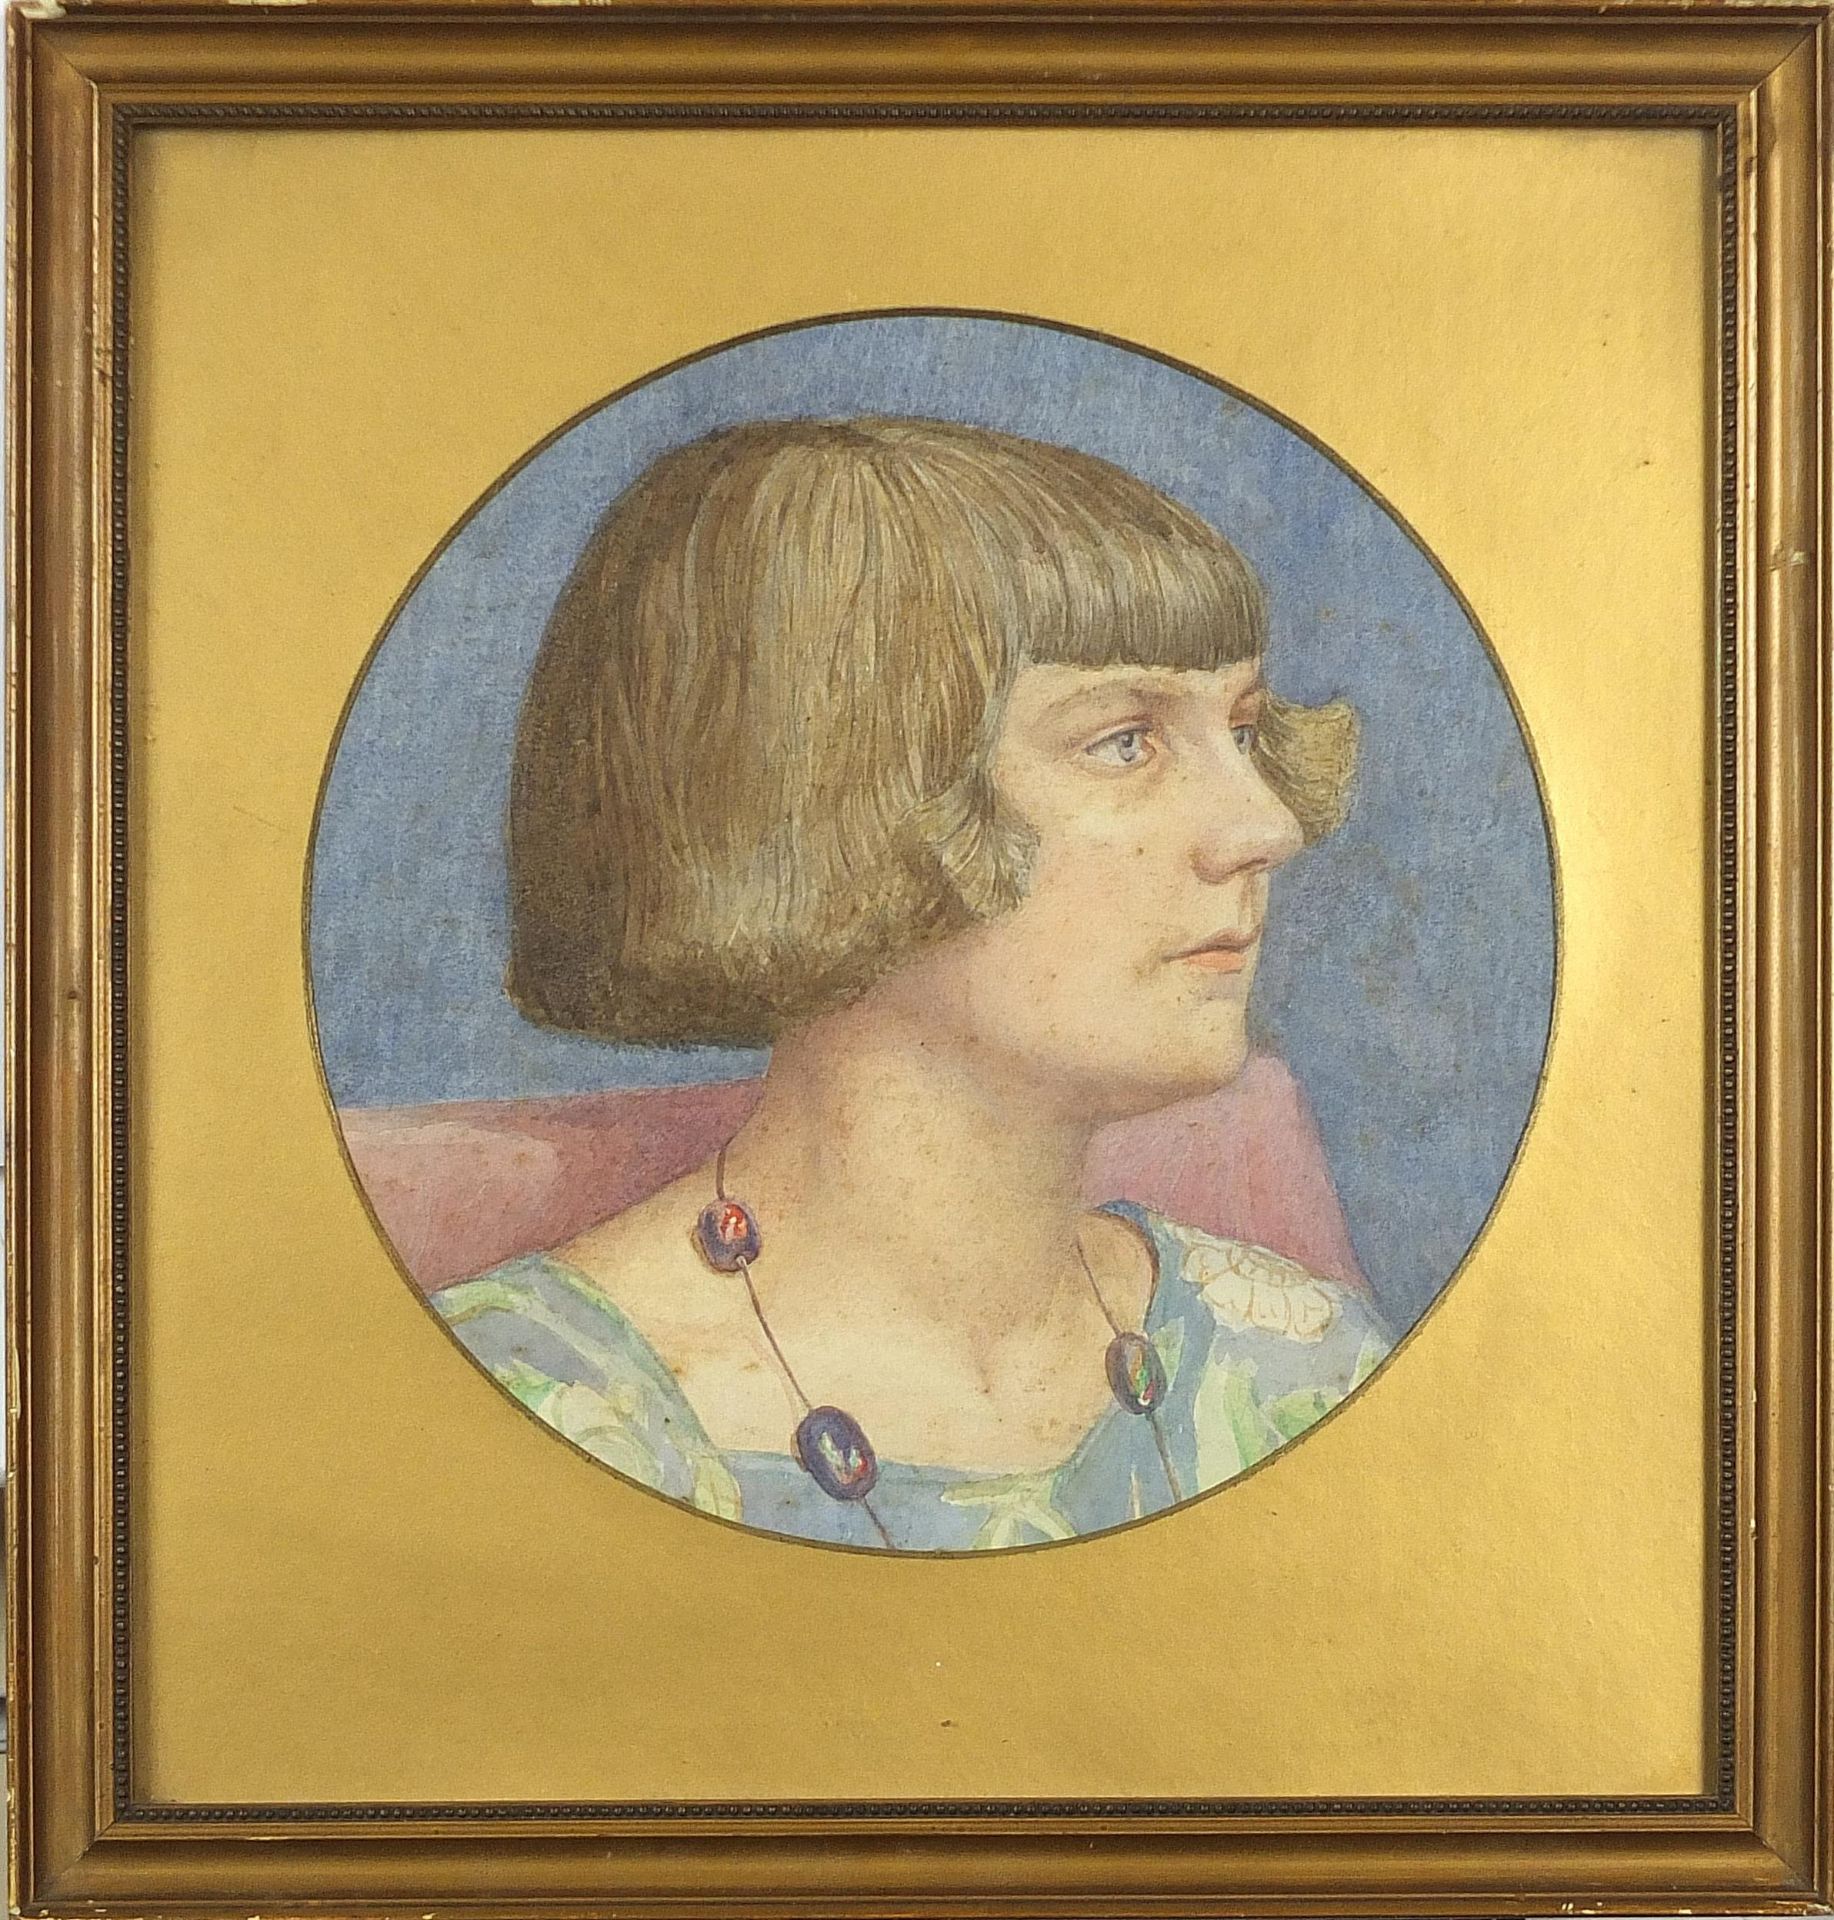 Thomas Capel Walton Smith - Head and shoulders portrait of a female, early 20th century oval - Image 2 of 4